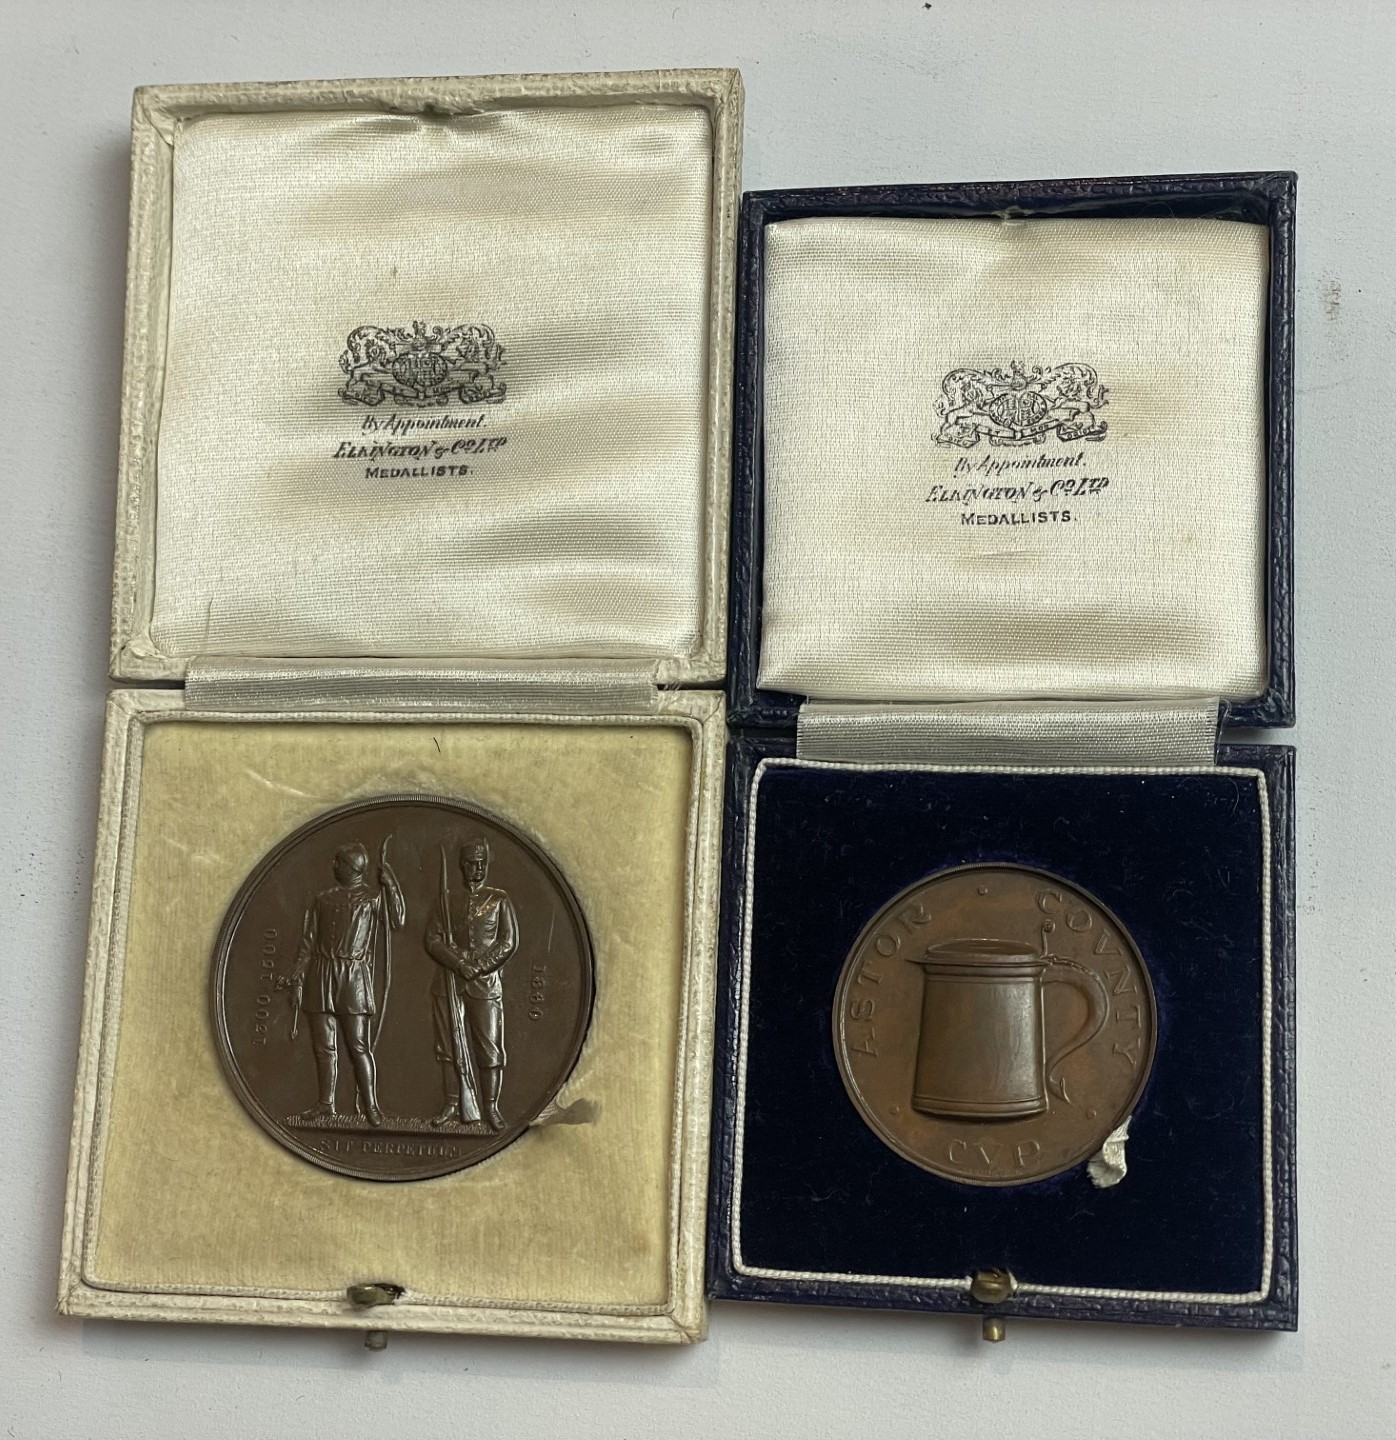 GB QV medals - Image 2 of 4